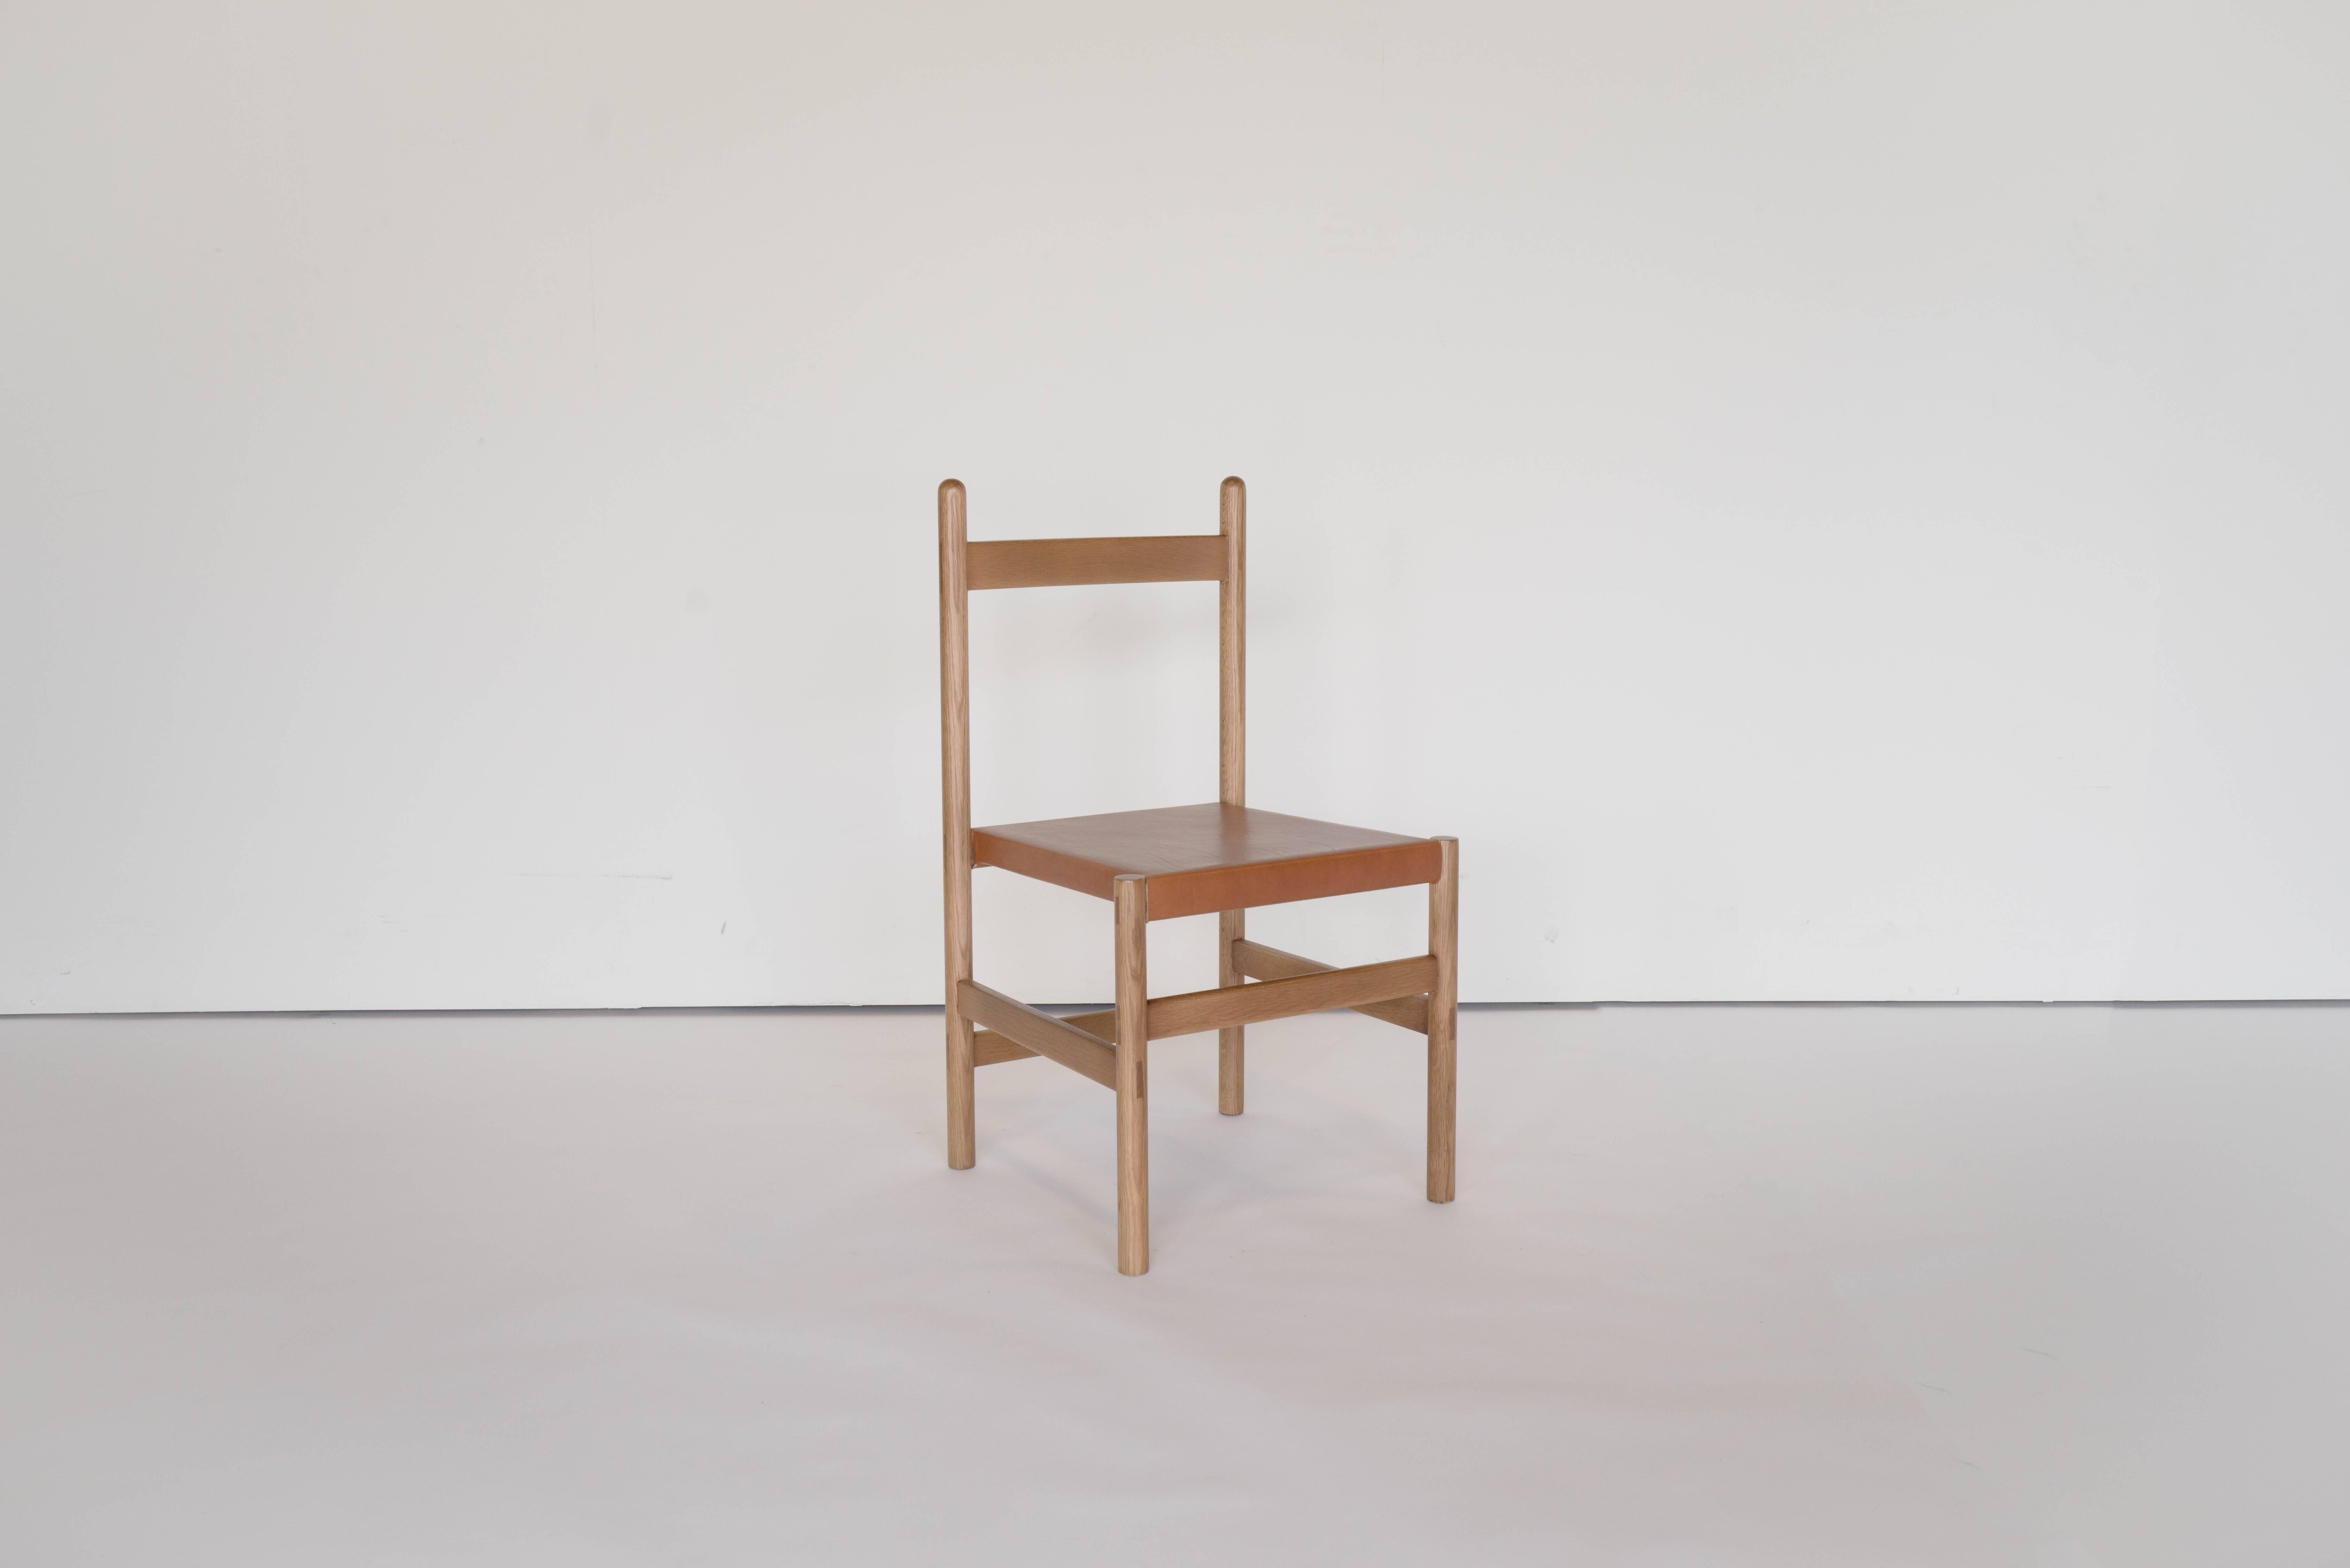 Sun at Six is a contemporary furniture design studio that works with traditional Chinese joinery masters to handcraft our pieces using traditional joinery. A simple classic, inspired by traditional shaker style. Clean, straightforward, and